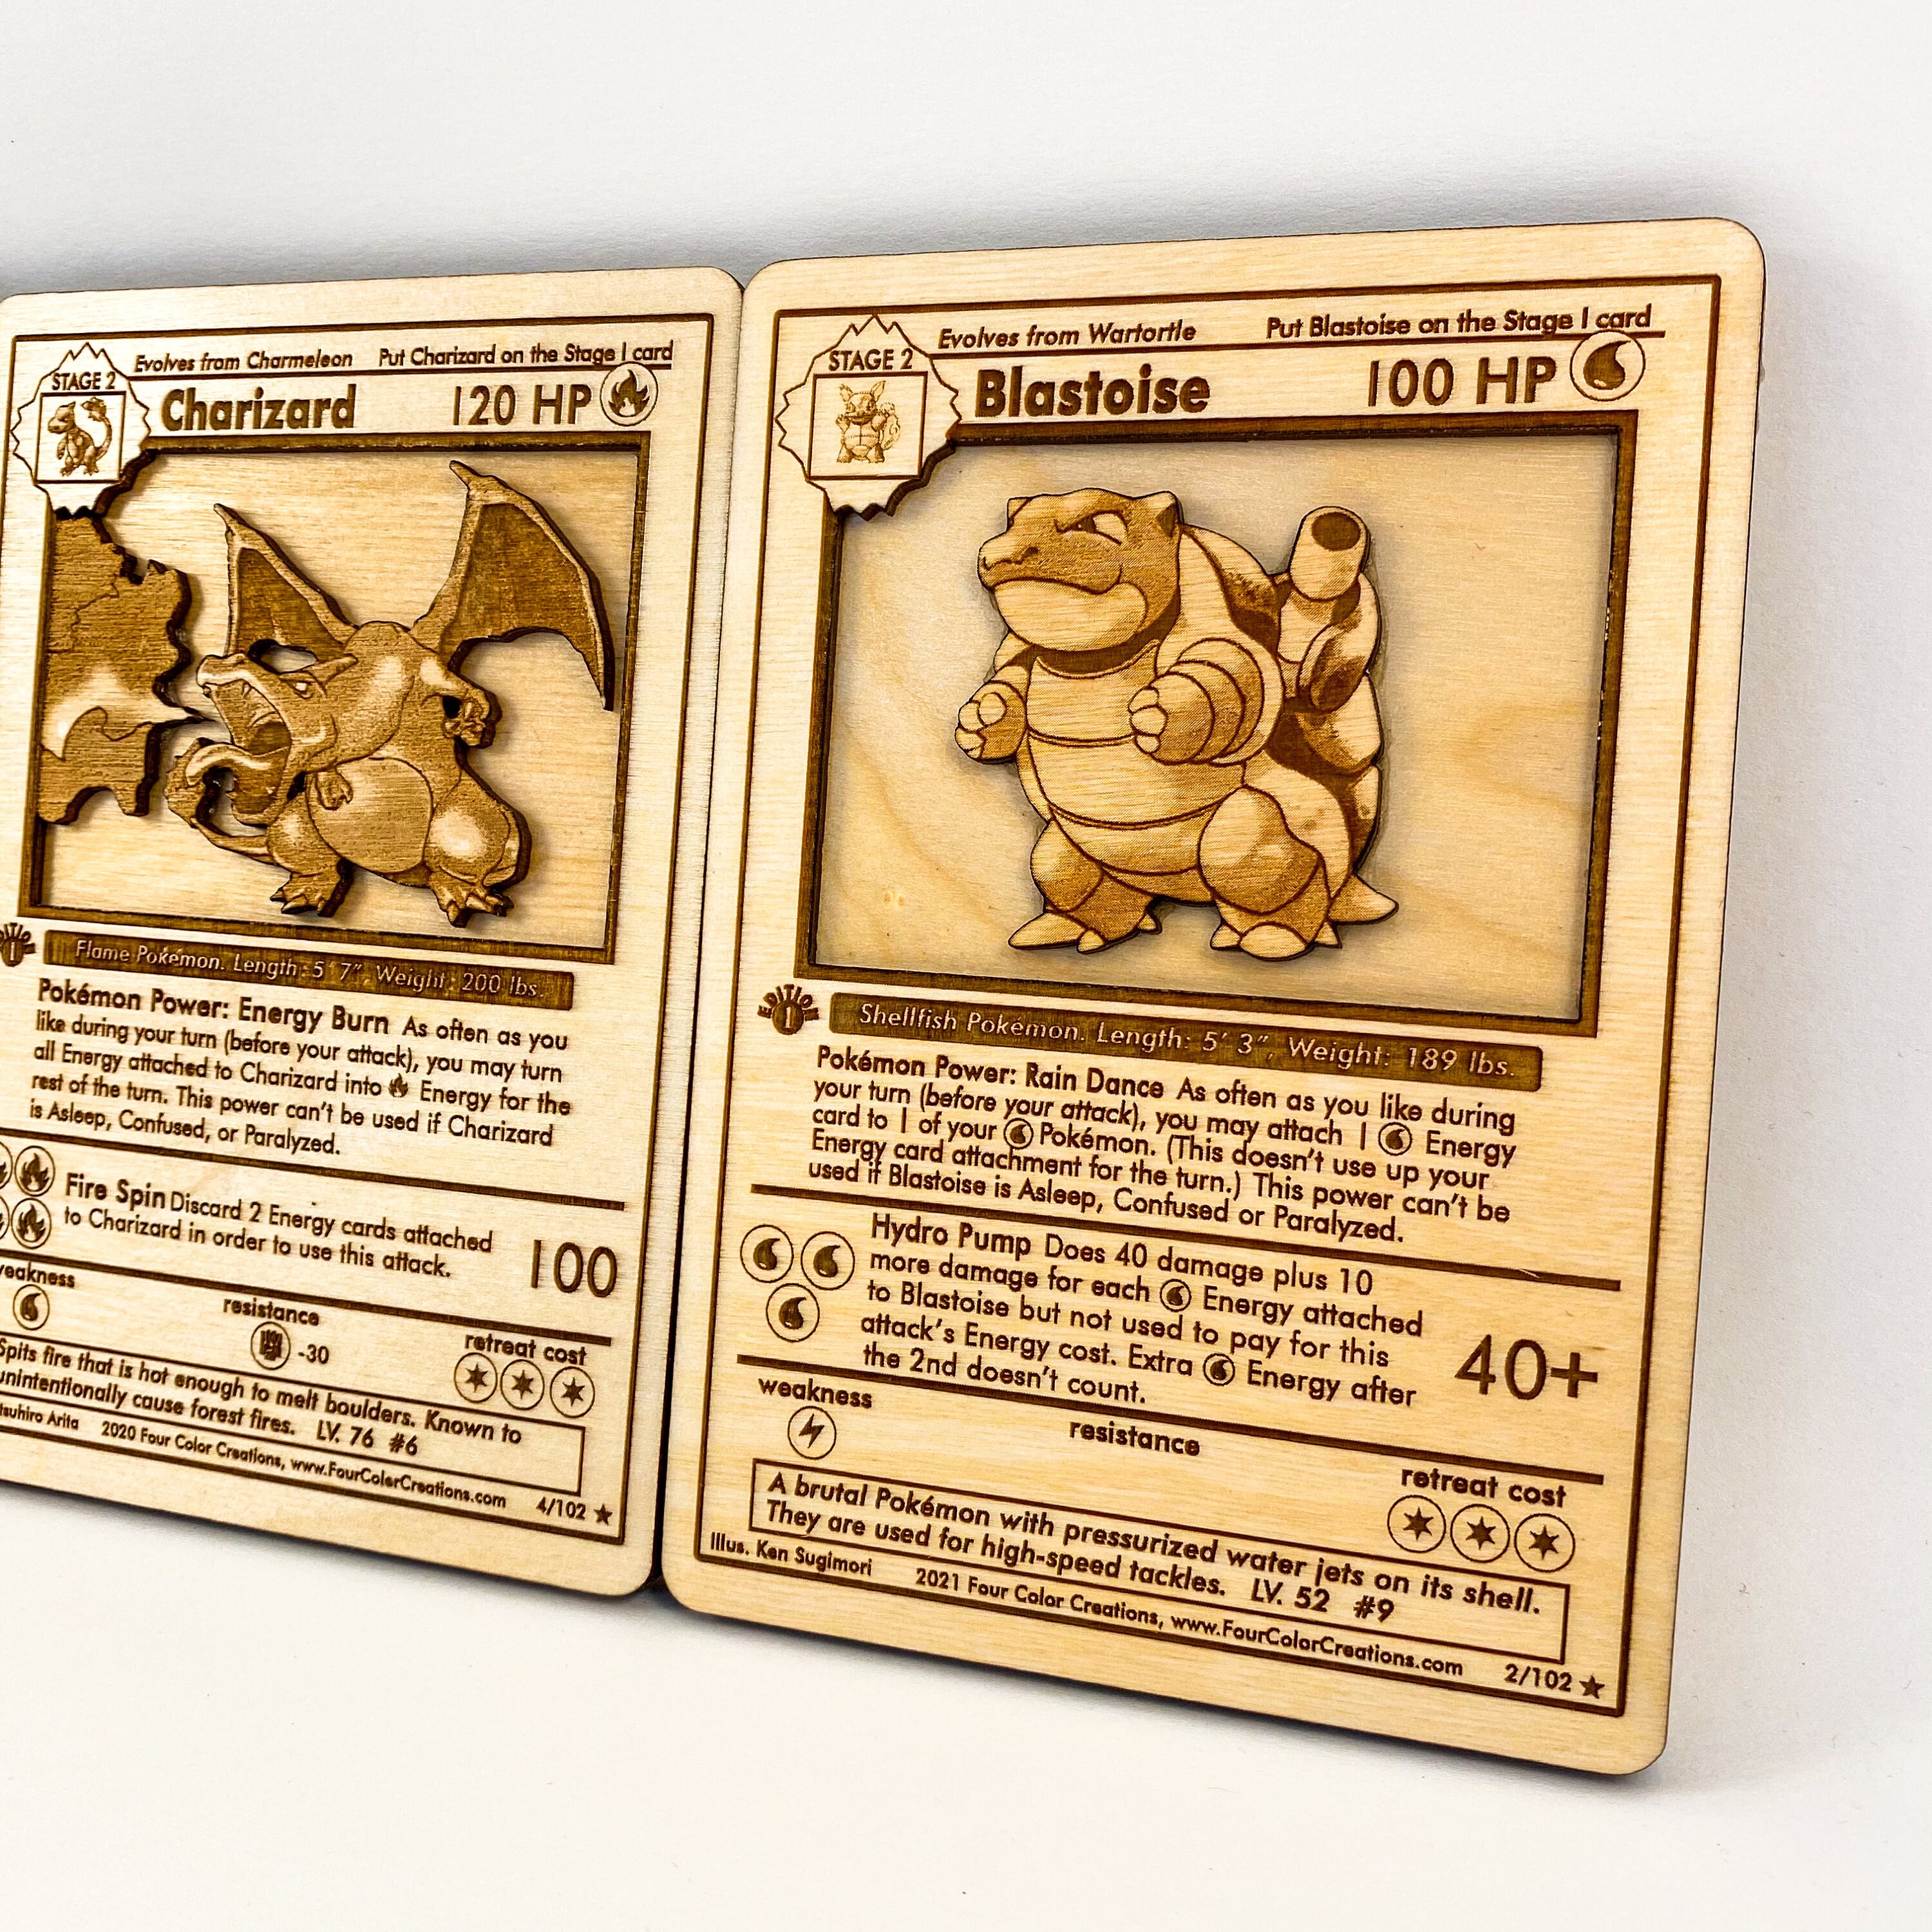 Charizard Wooden Puzzle